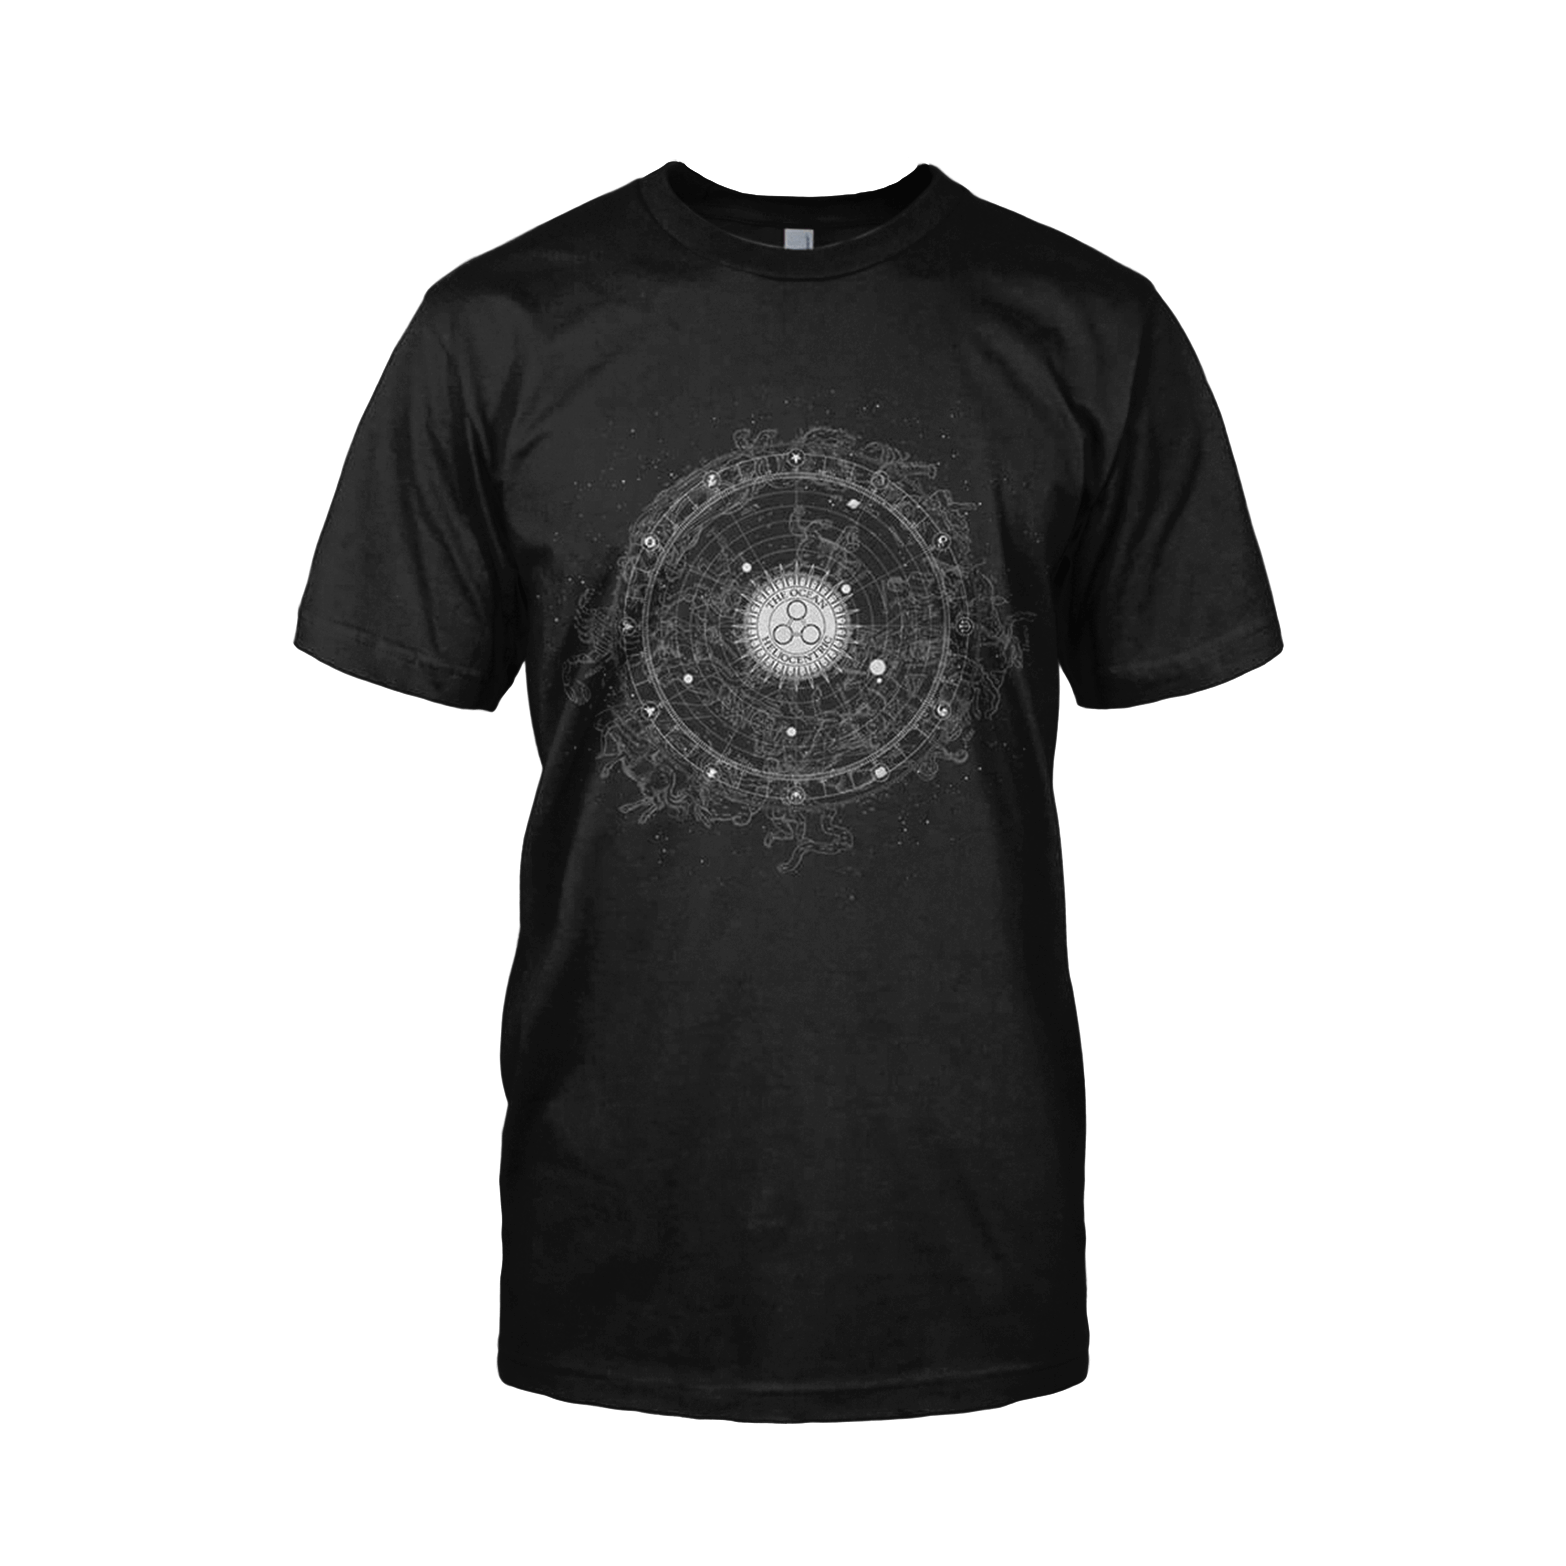 THE OCEAN – Heliocentric T-Shirt